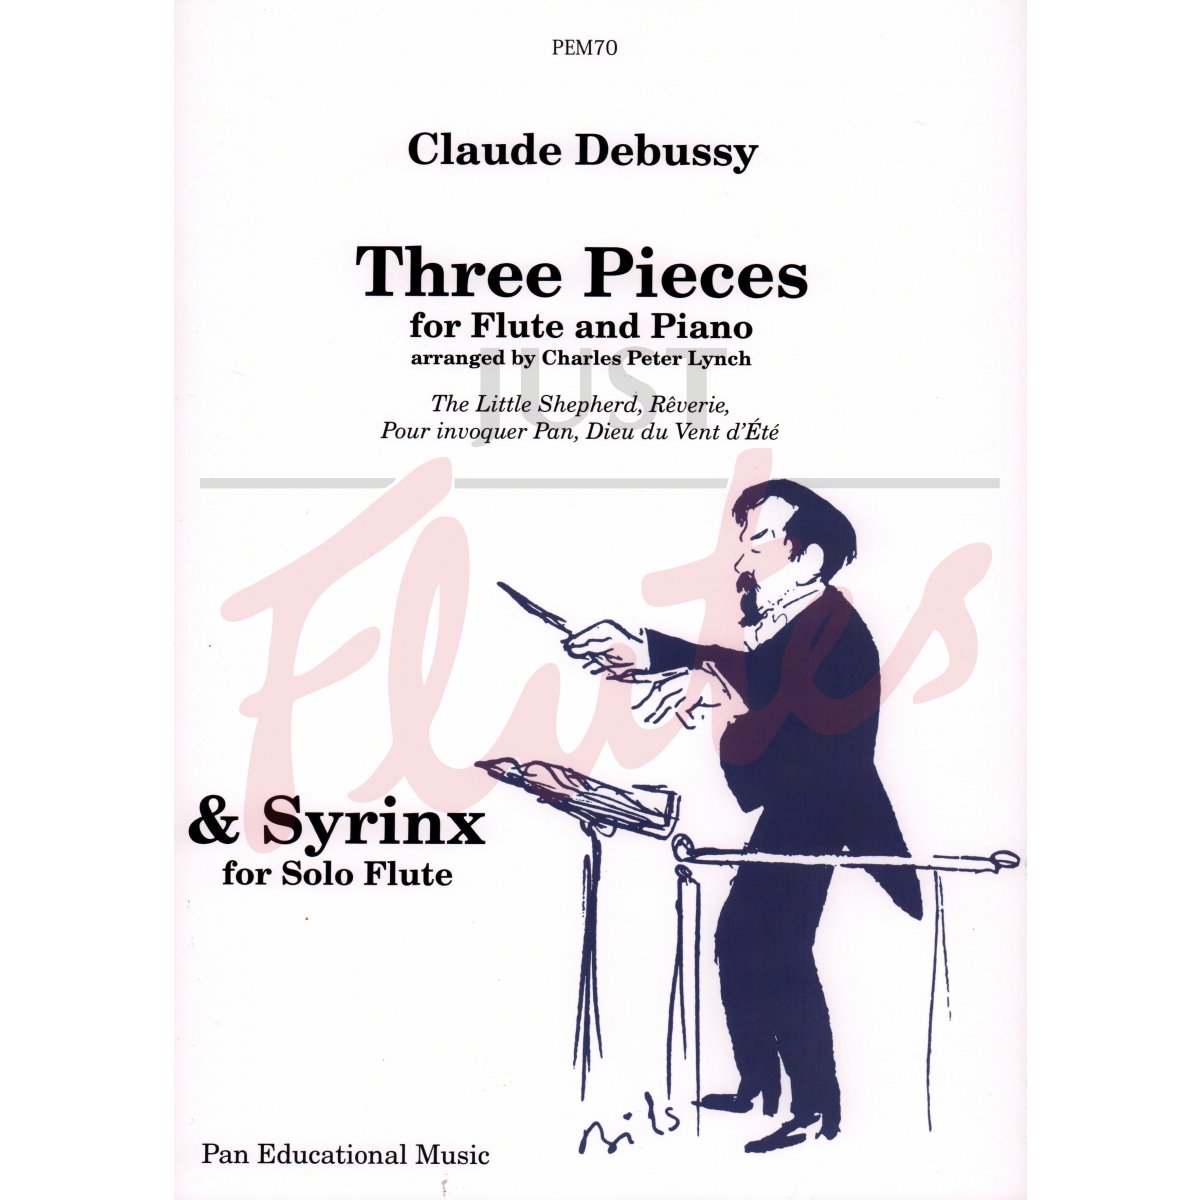 Syrinx for solo flute and Three Pieces for flute &amp; piano